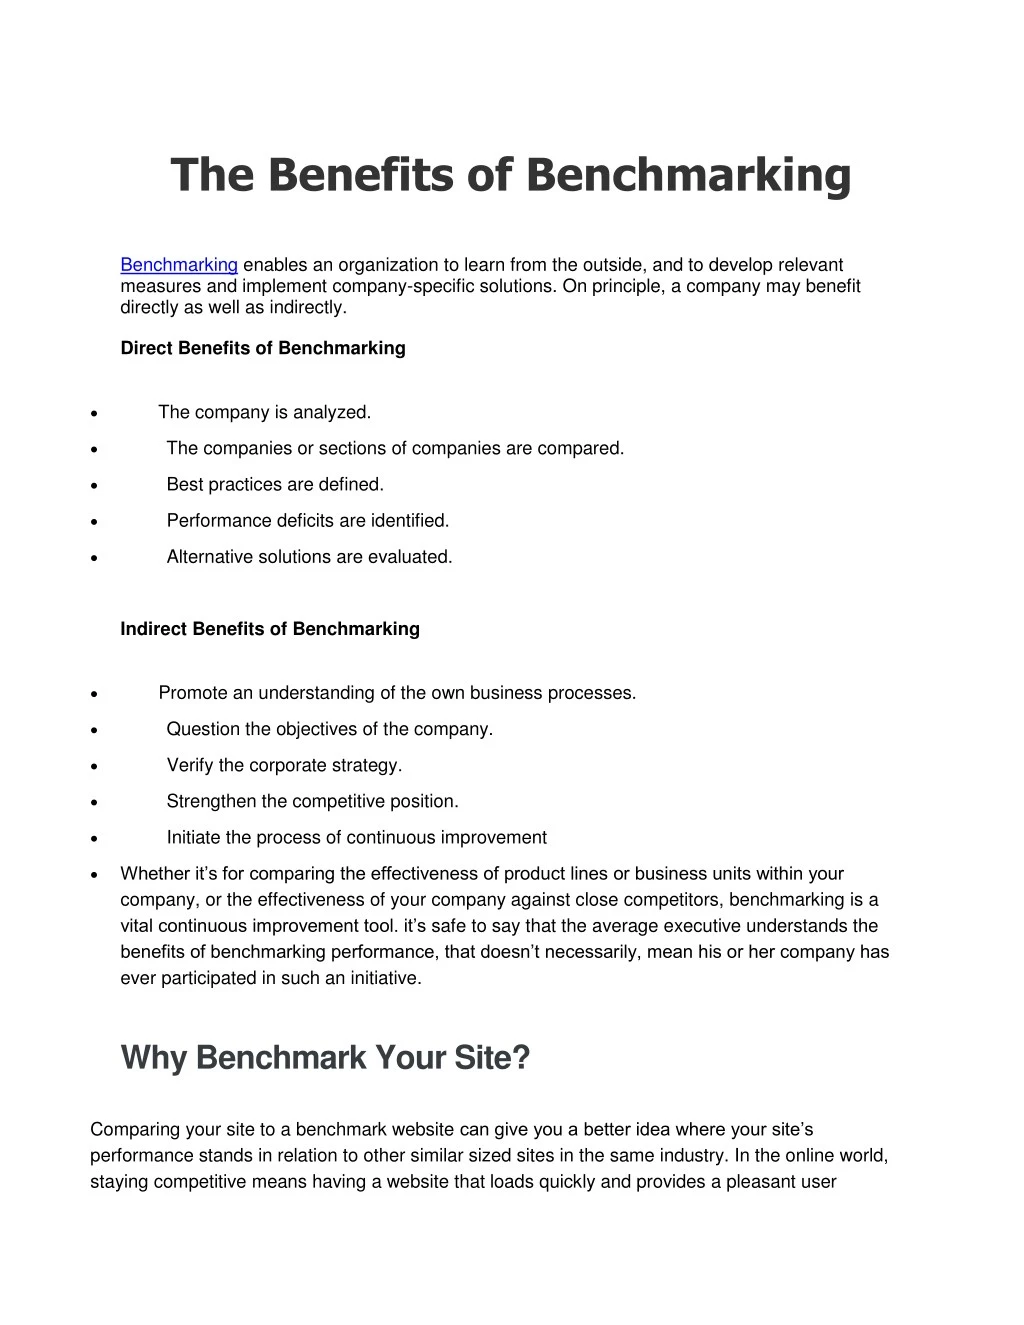 PPT The Benefits of Benchmarking PowerPoint Presentation, free